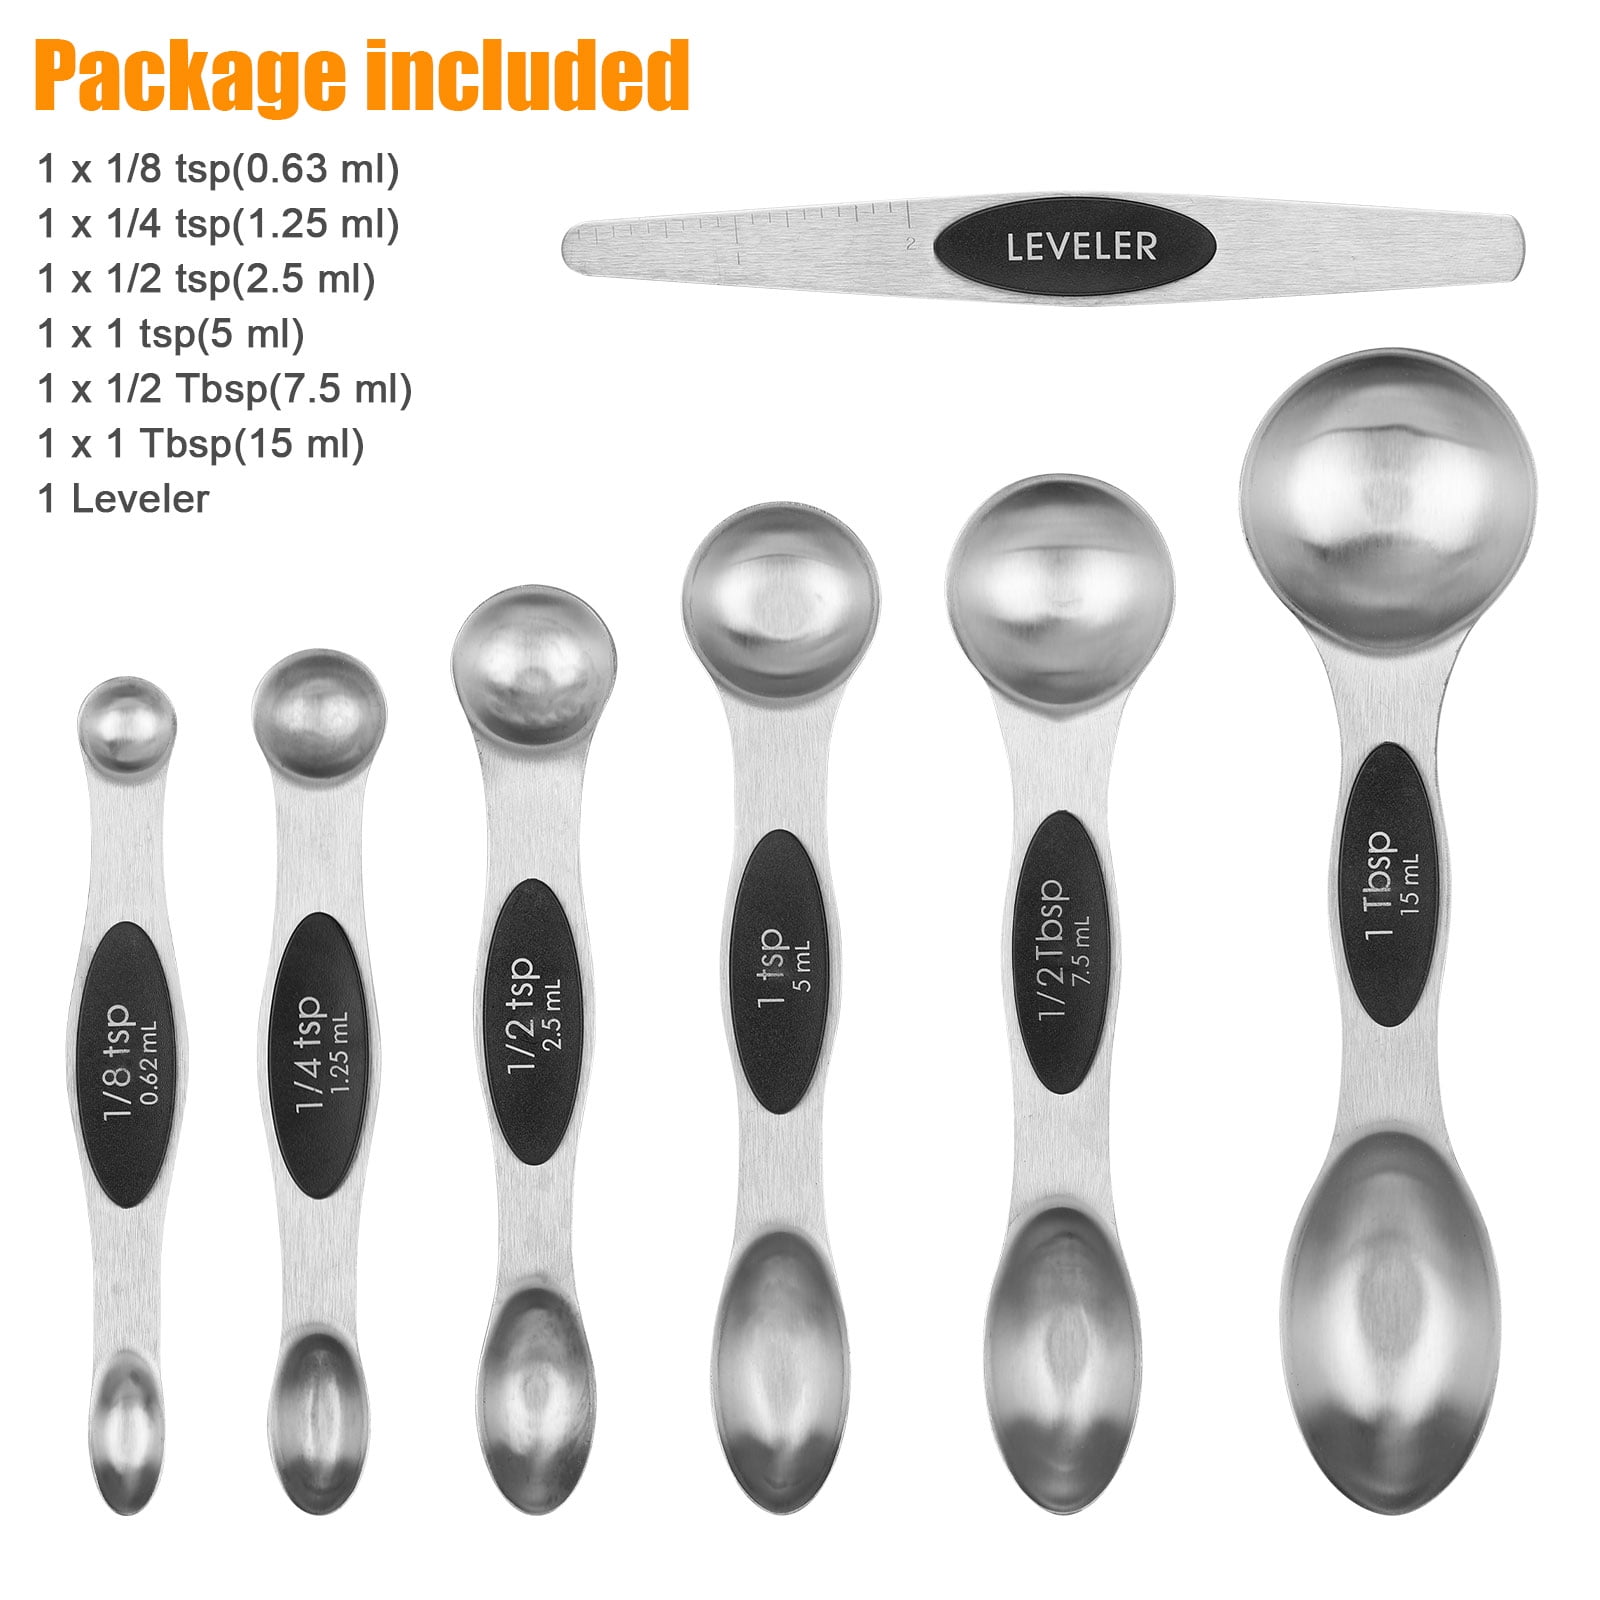 Magnetic Measuring Spoons Set of 9 Stainless Steel Stackable Dual Sided Teaspoon  Tablespoon-Black - Measuring Cups & Spoons - New York, New York, Facebook  Marketplace